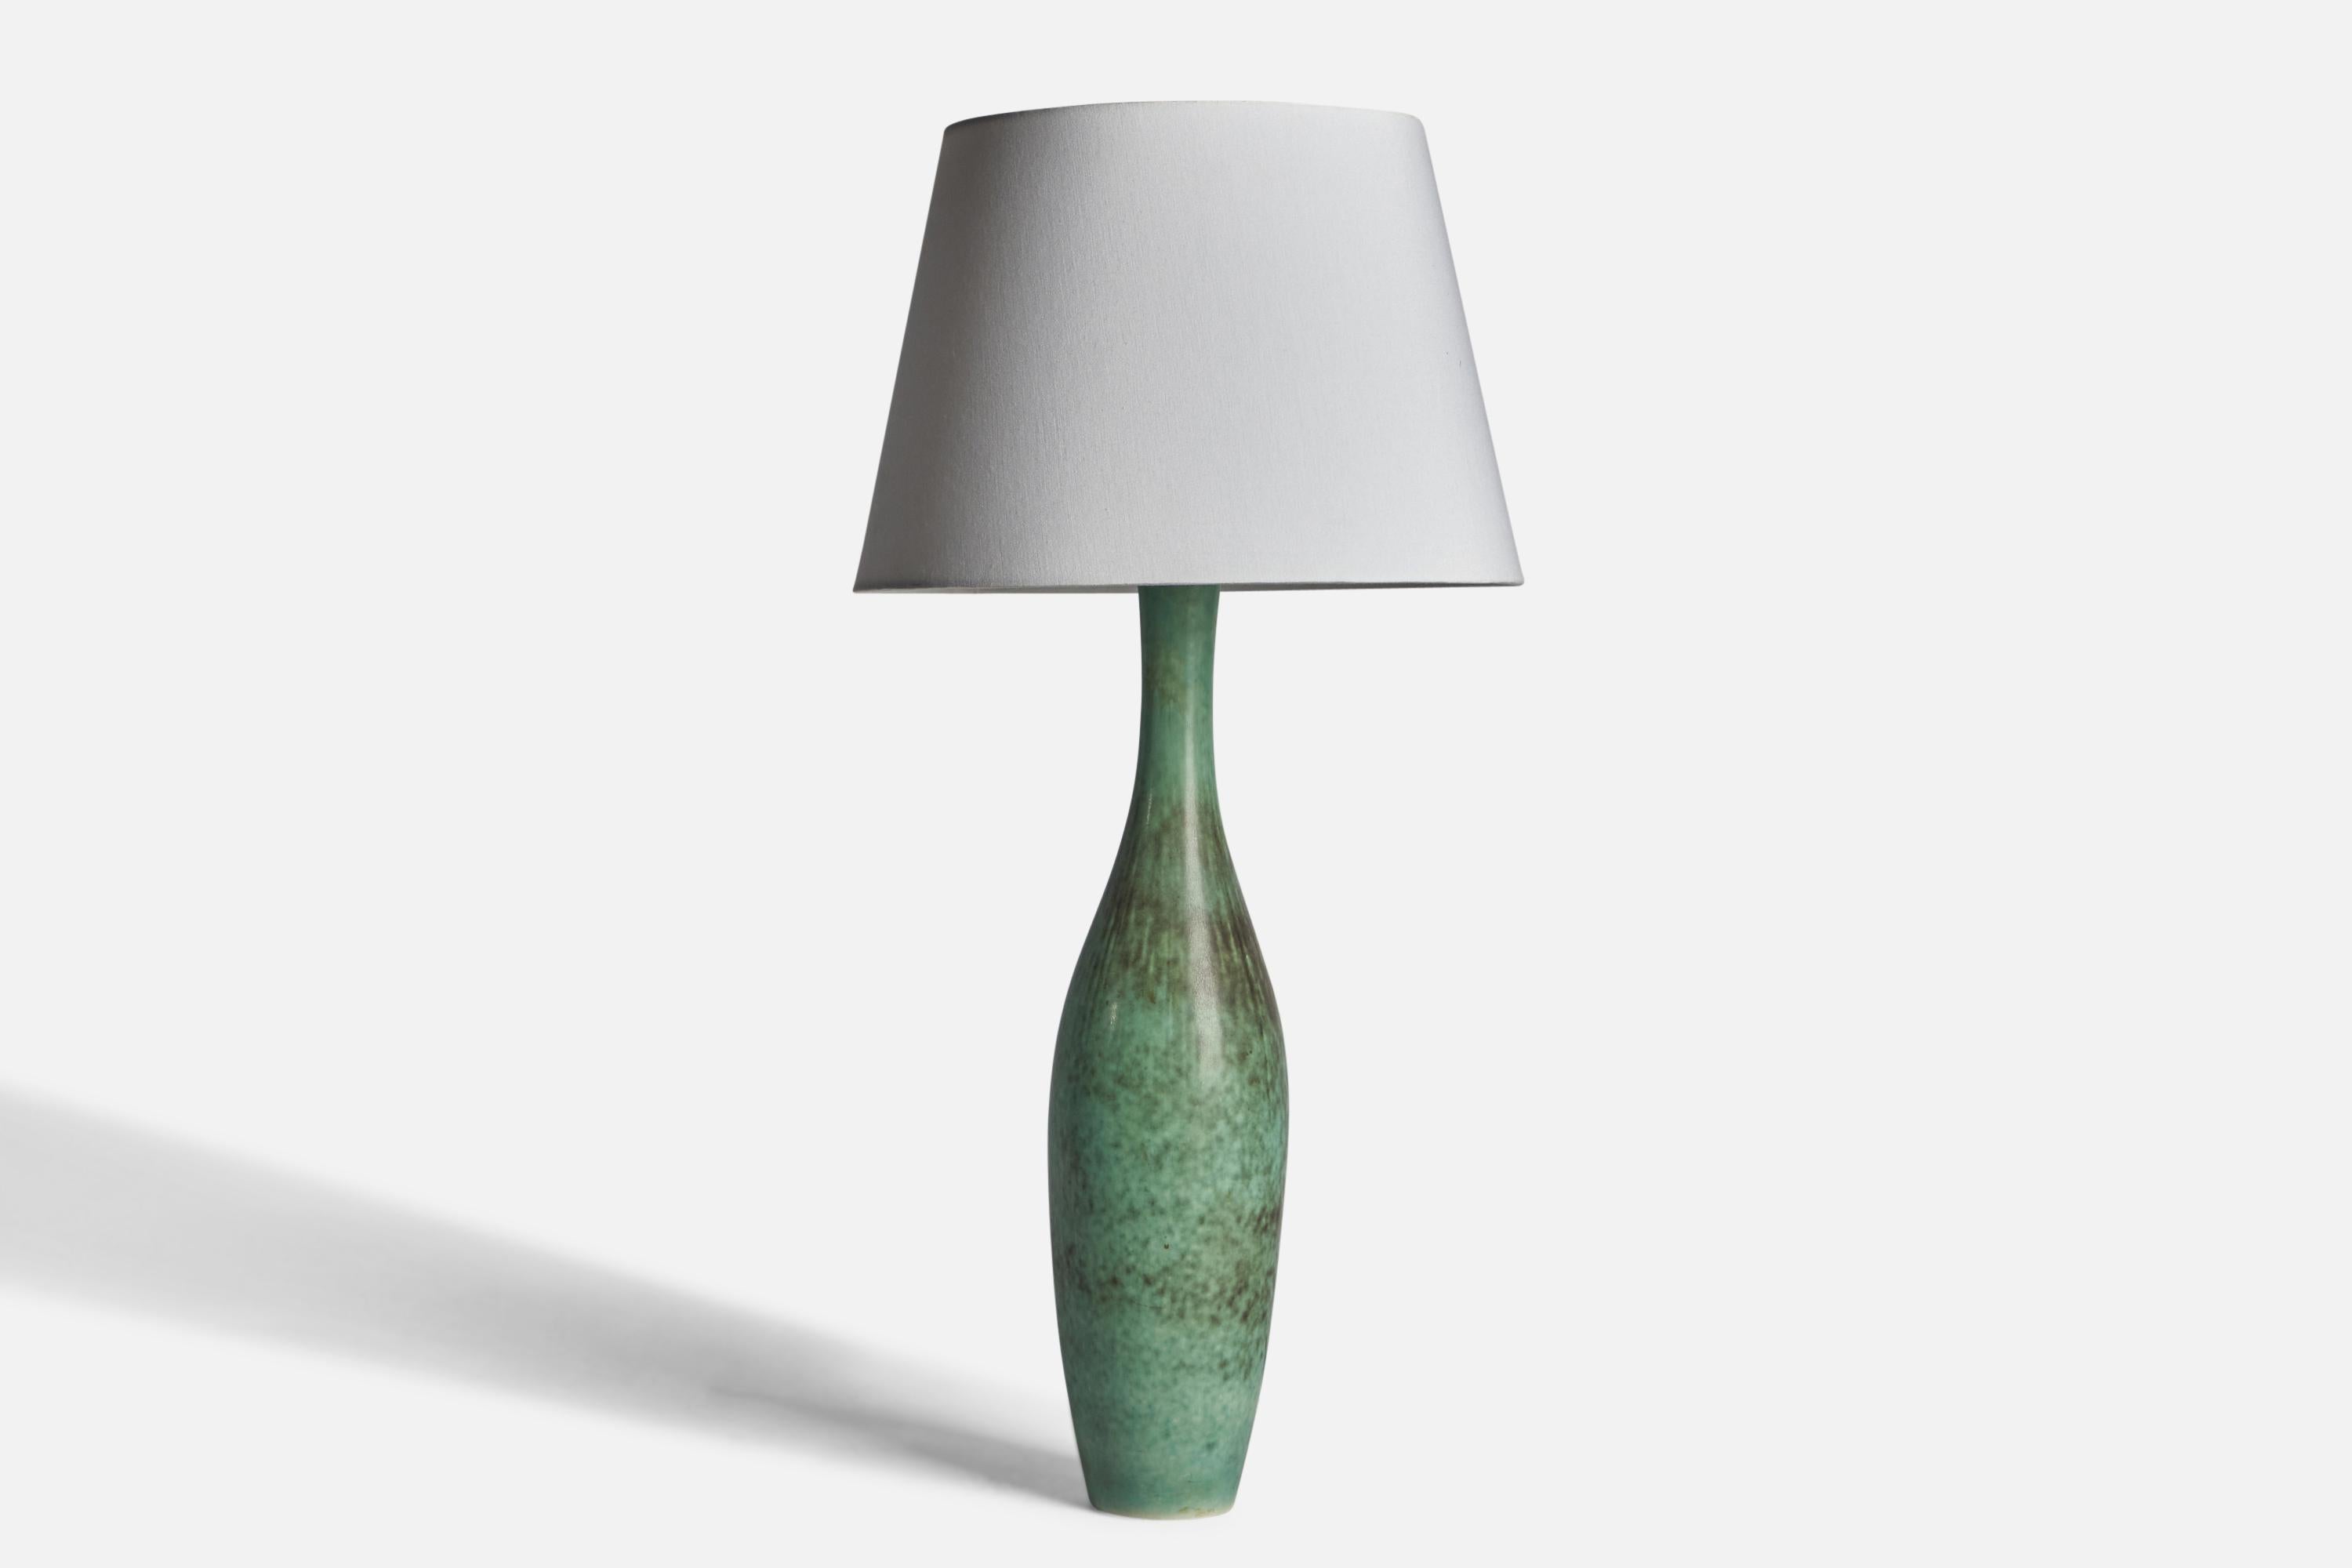 A sizeable green-glazed stoneware table lamp designed Carl-Harry Stålhane and produced by Rörstrand, Sweden, 1950s.

Dimensions of Lamp (inches): 24” H x 5.5” Diameter
Dimensions of Shade (inches): 10” Top Diameter x 14